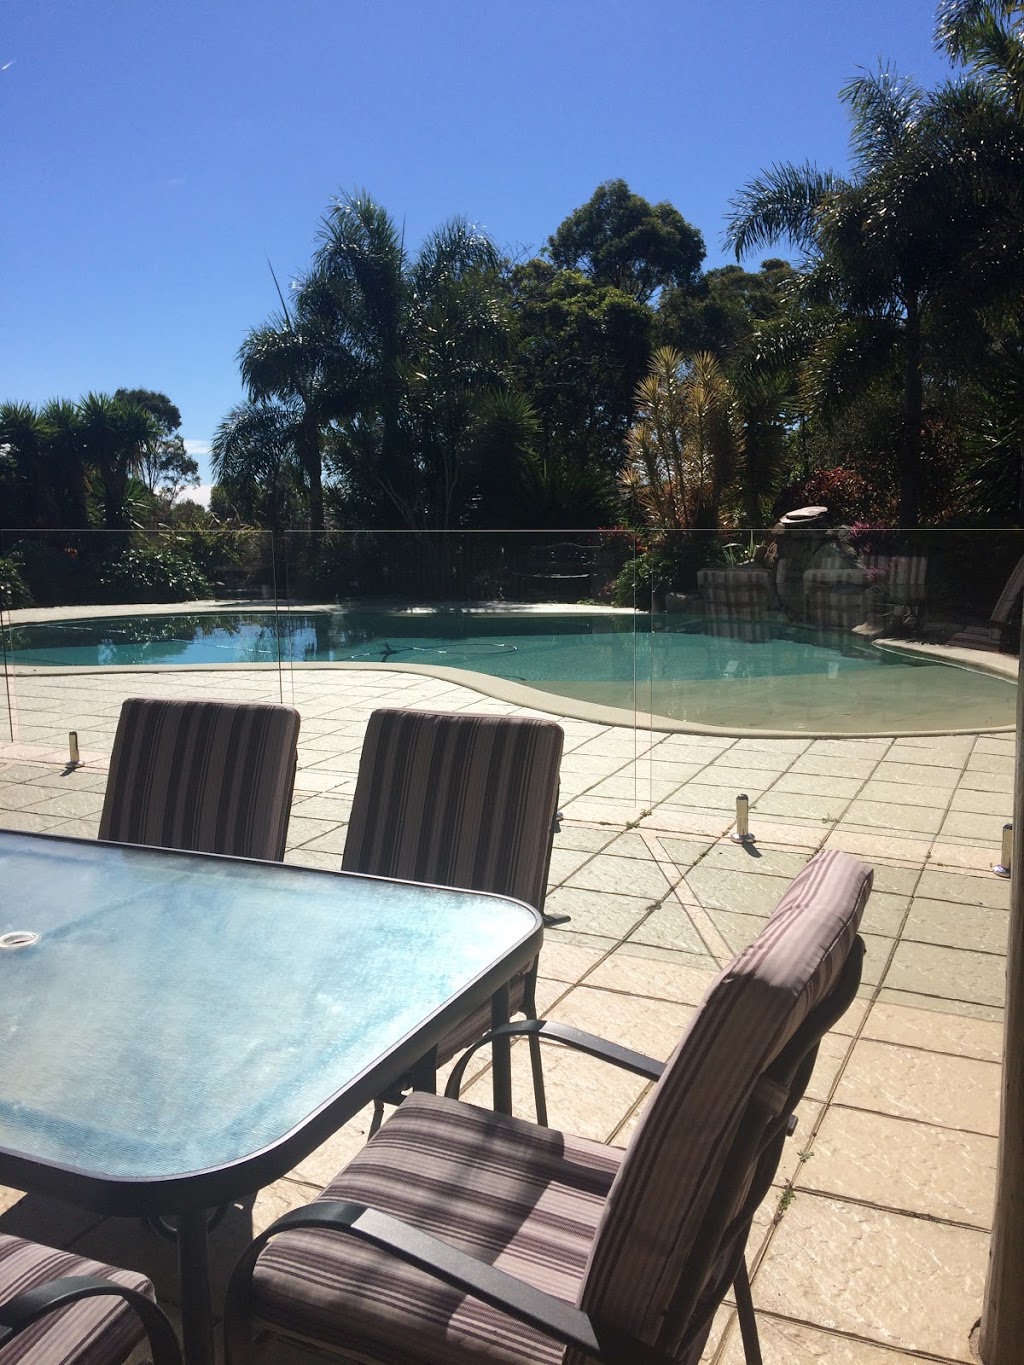 TAKURA HEIGHTS - Modern Country Apartment with Pool Access | lodging | 72 Sanctuary Hills Rd, Takura QLD 4655, Australia | 0429067759 OR +61 429 067 759